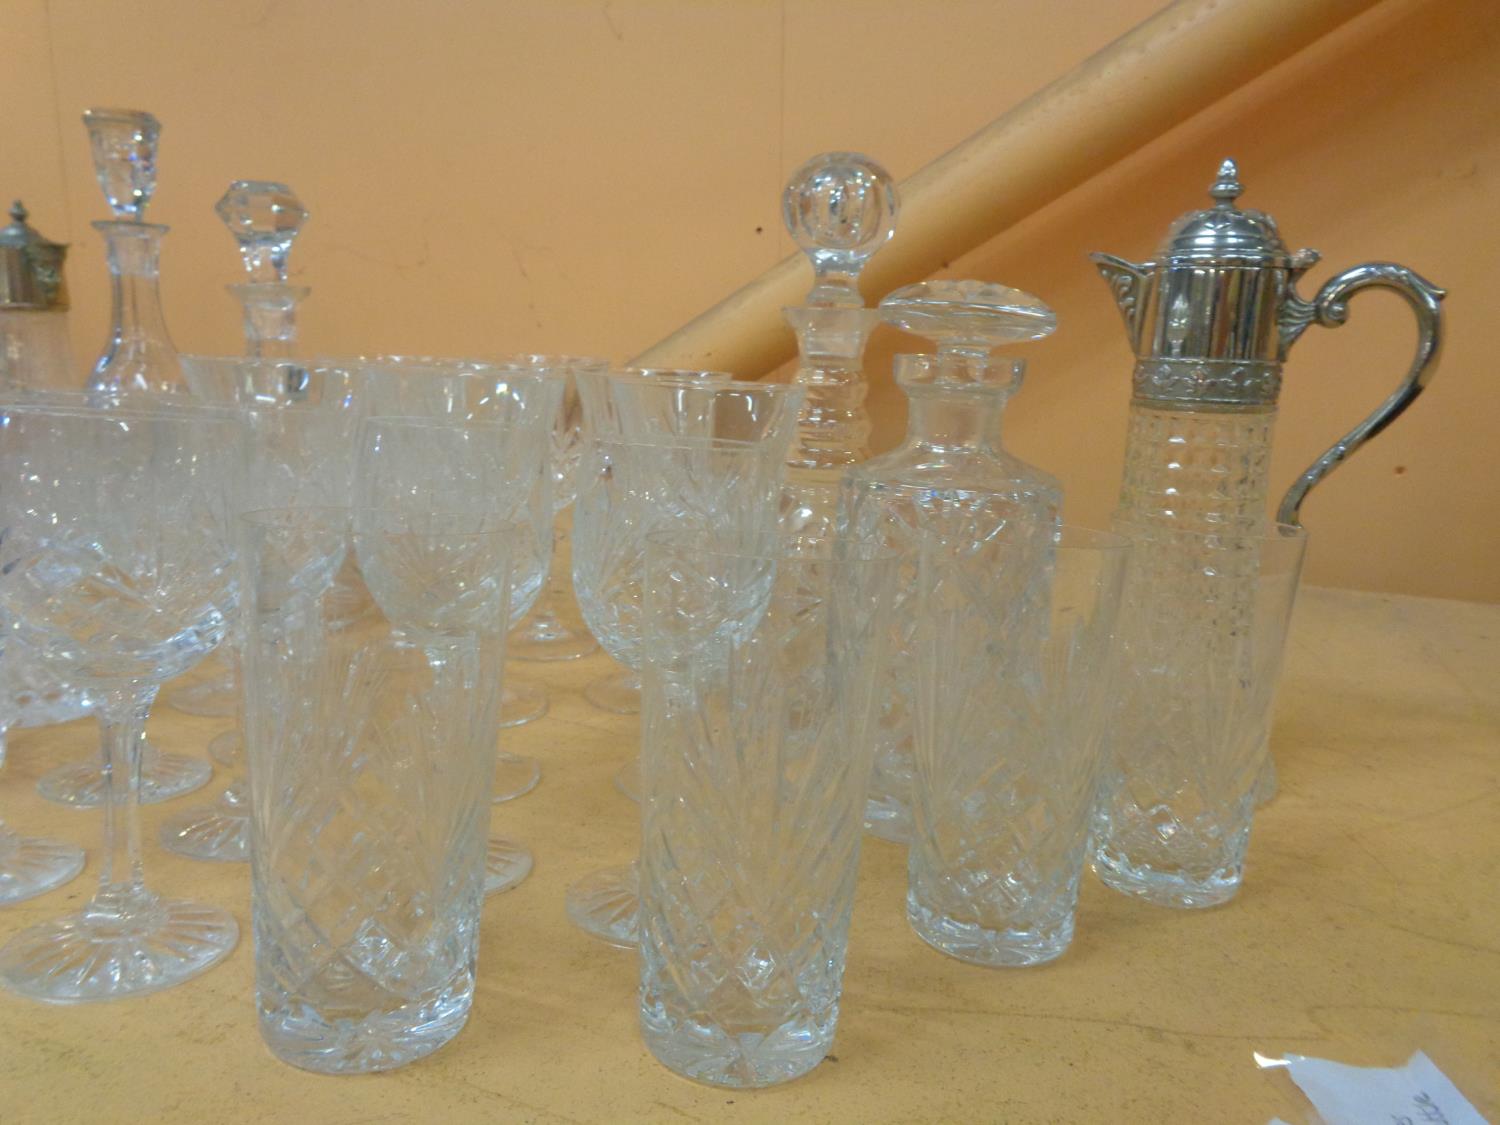 A LARGE COLLECTION OF GLASSWARE INCLUDING DECANTERS AND A VARIETY OF DRINKS GLASSES - Bild 7 aus 8